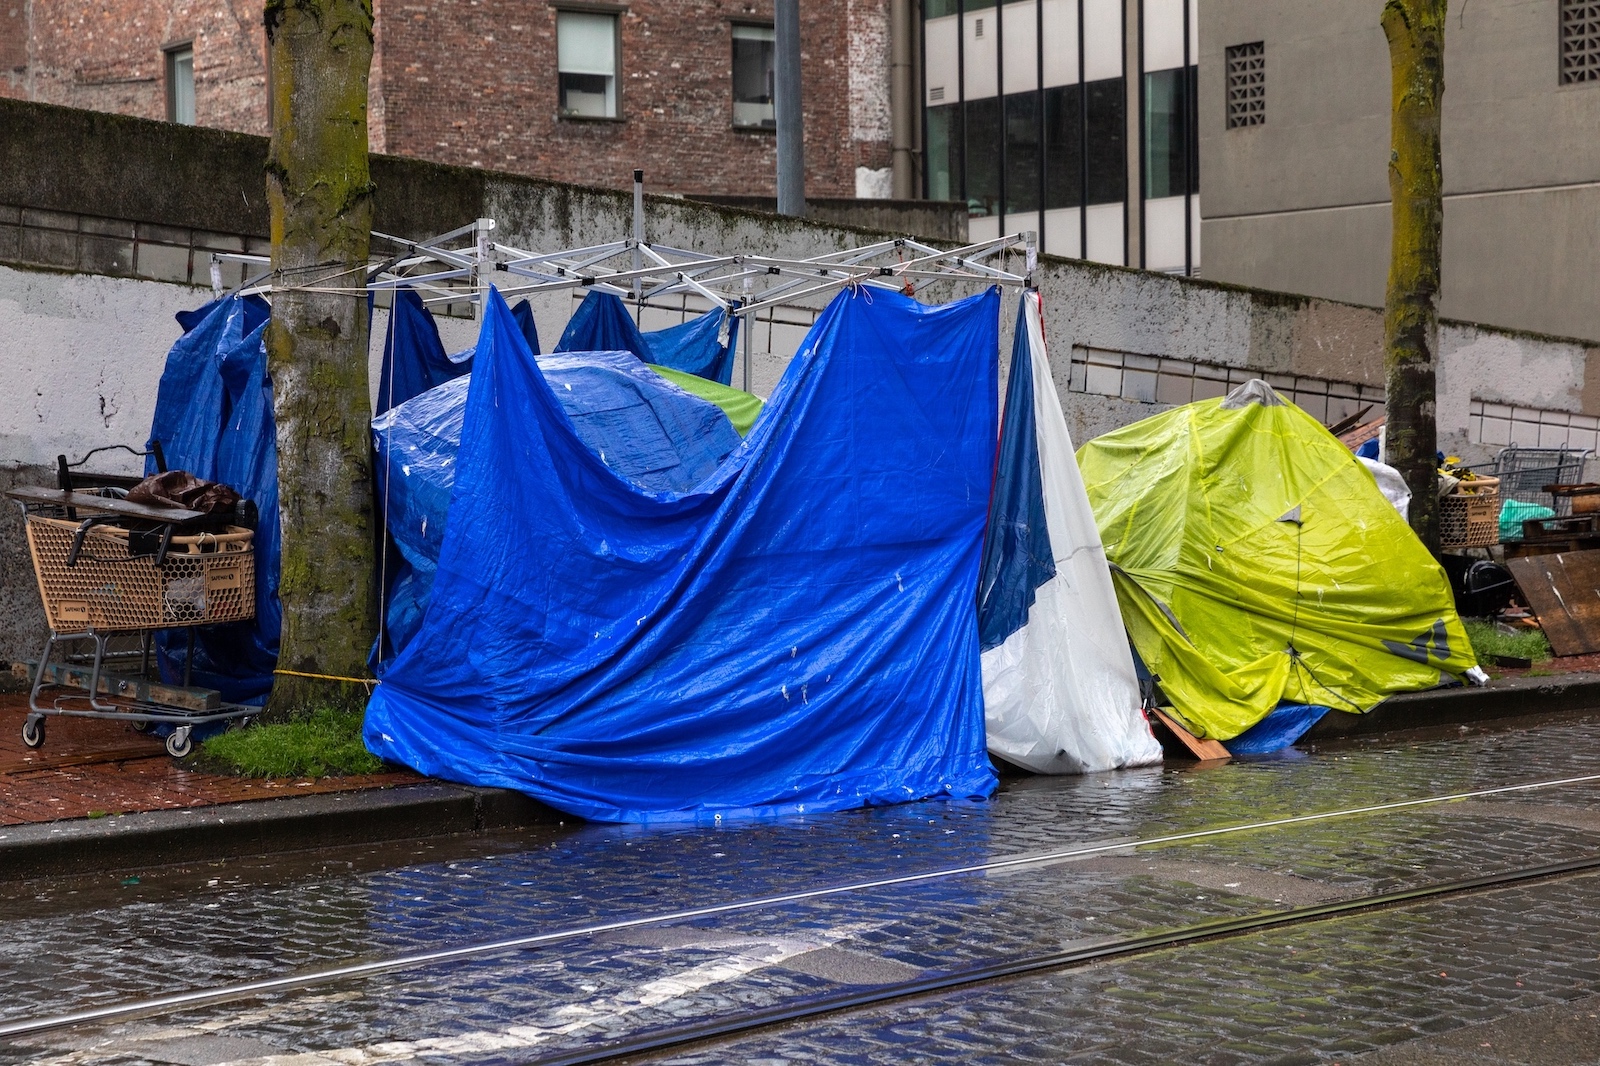 Portland, OR, USA-March 14, 2022: Homeless camps with tents in the streets of Downtown Portland, Oregon